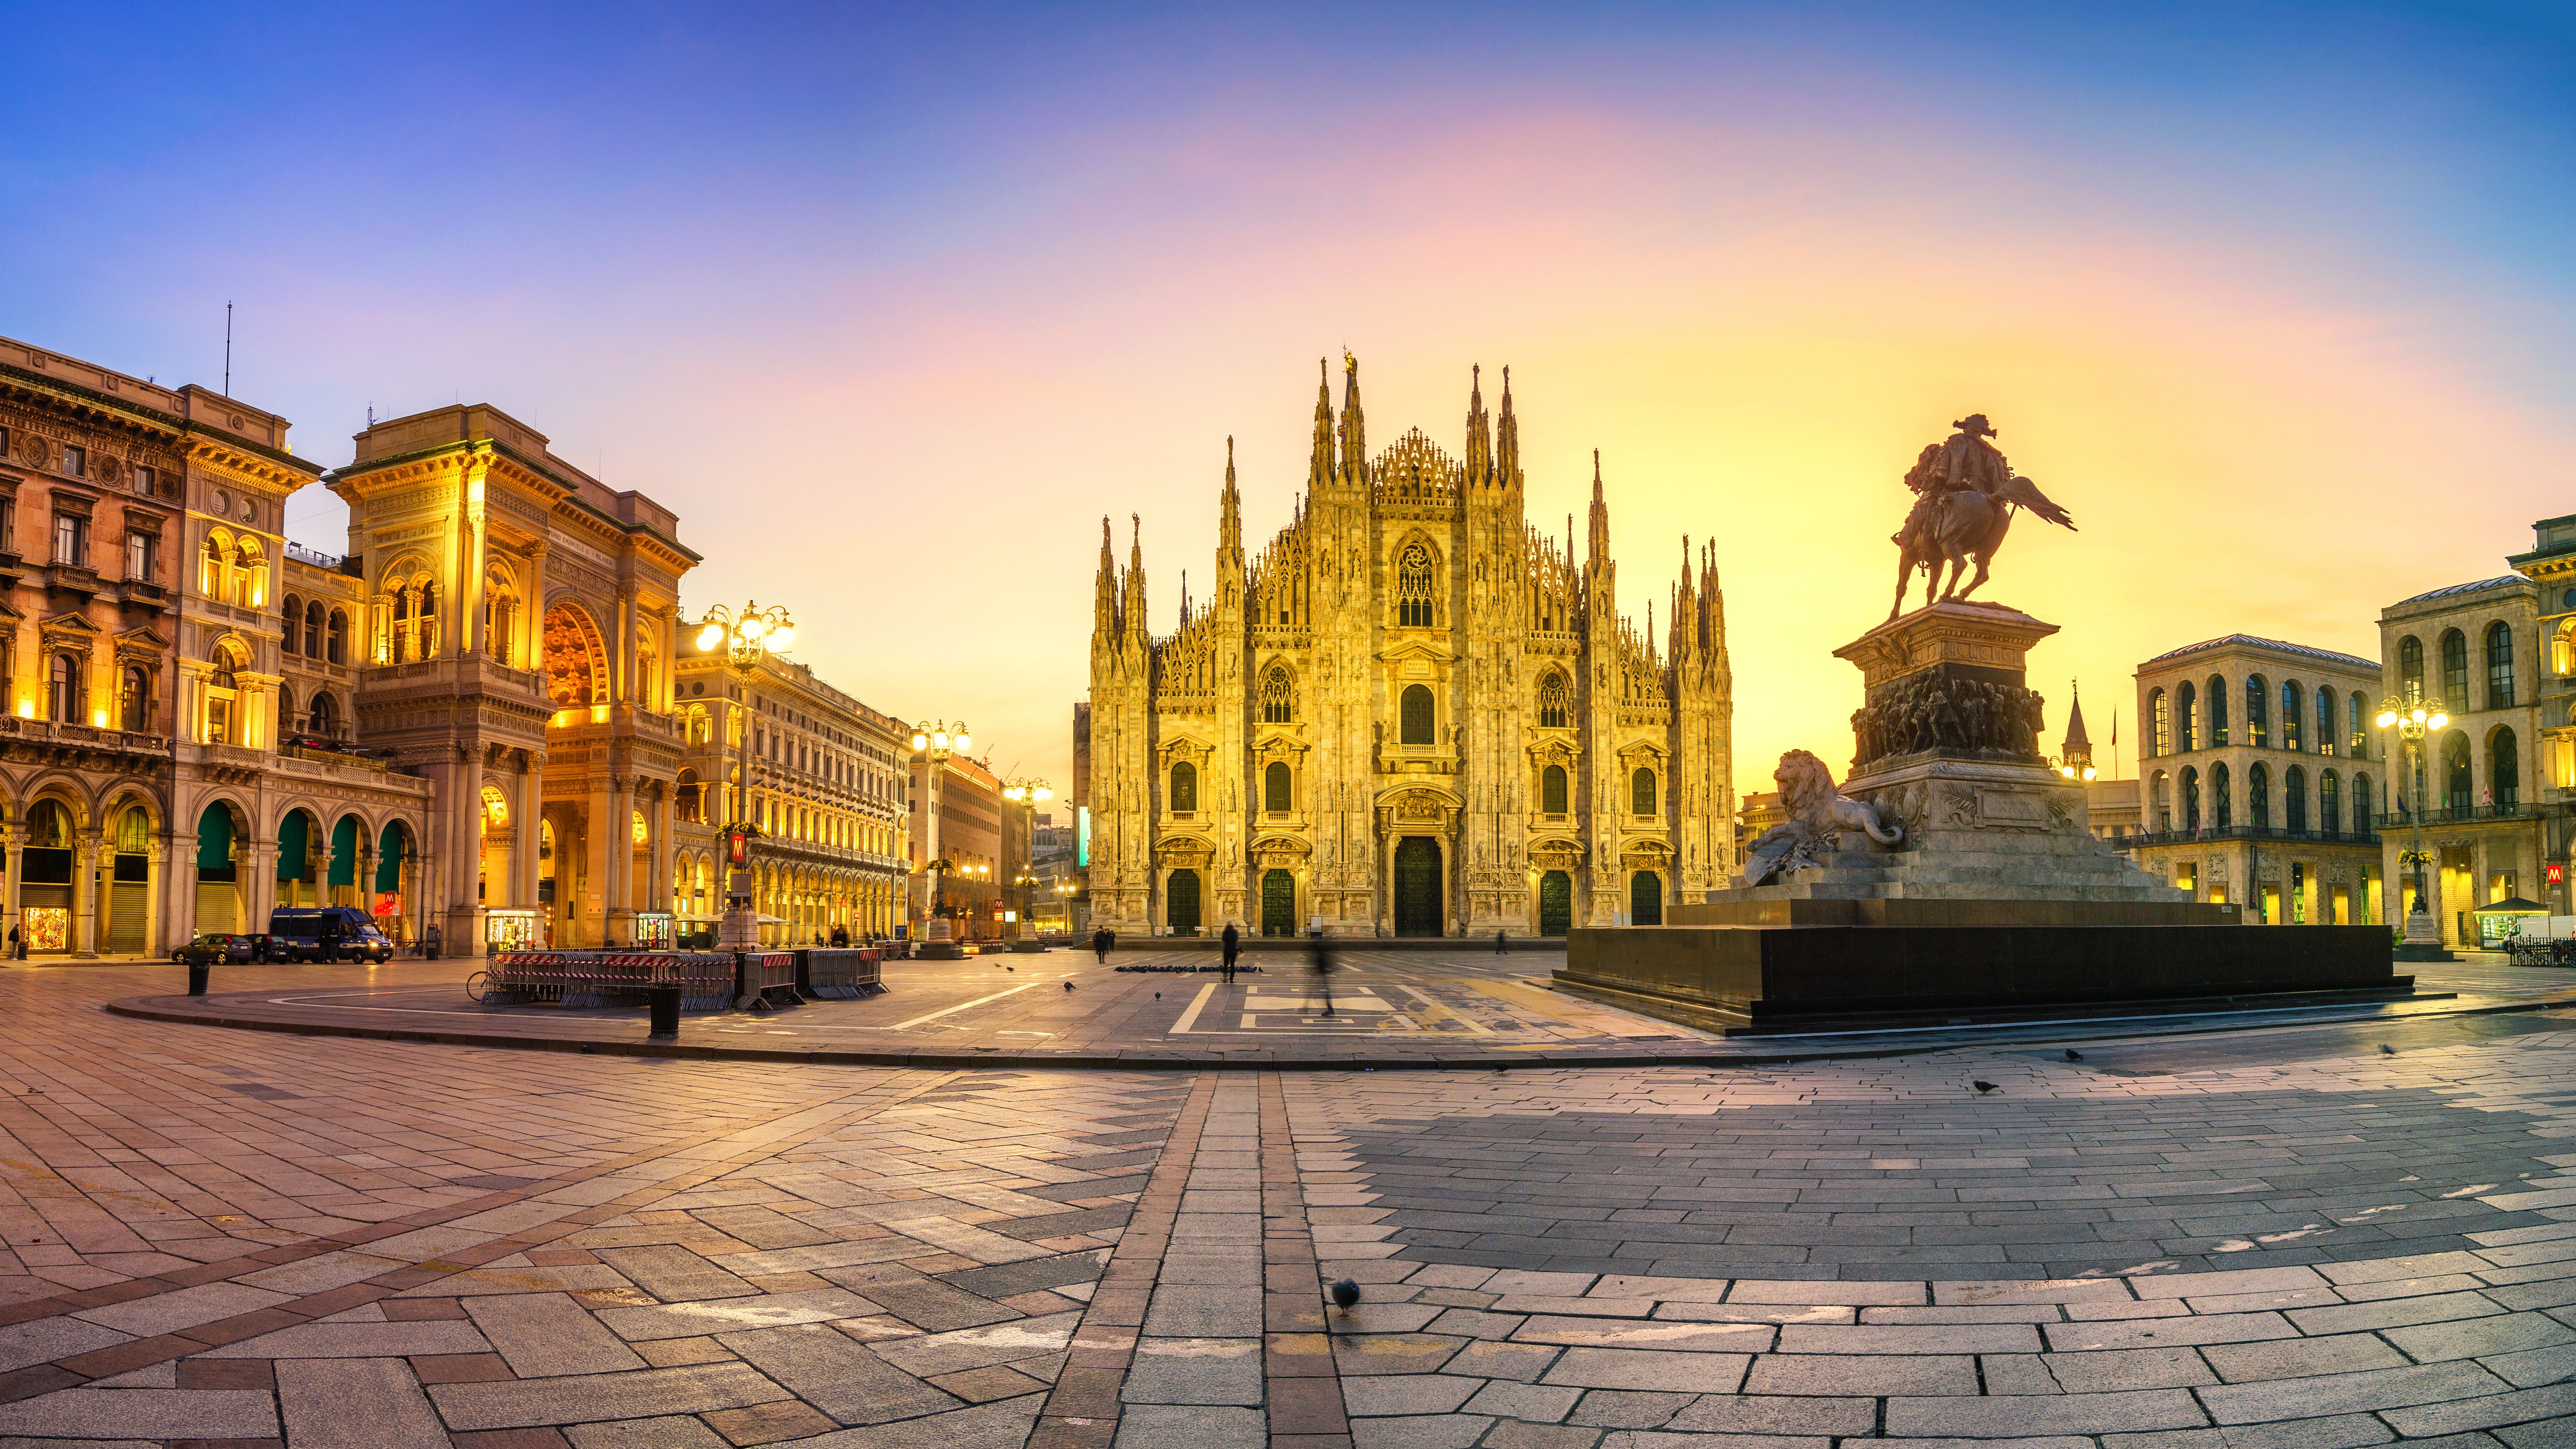 Piazza del Duomo at first sunlight in Milan, Italy